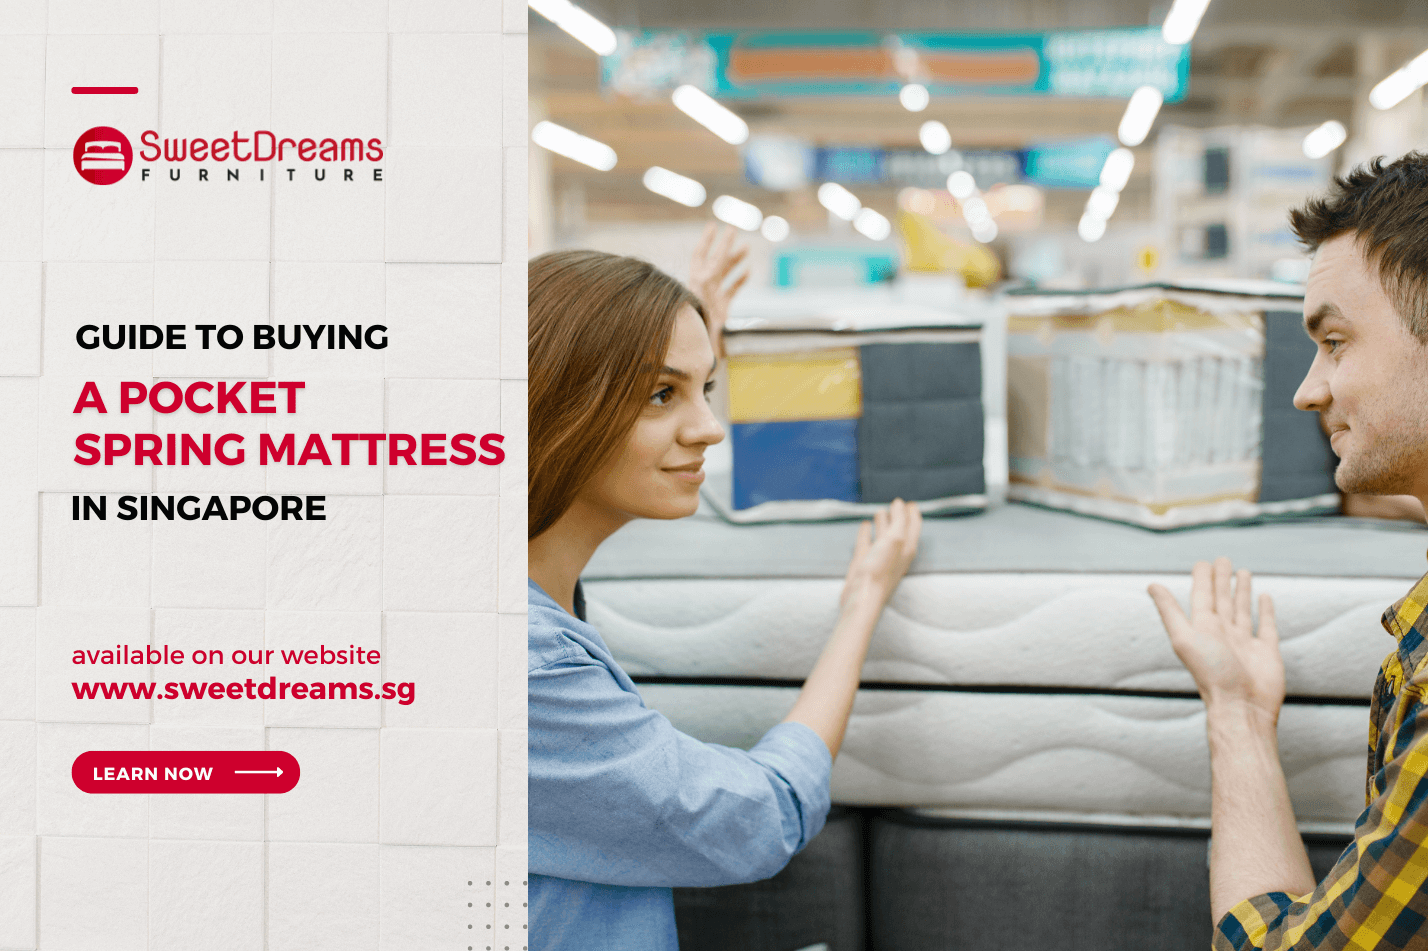 Guide to Buying a Pocket Spring Mattress in Singapore